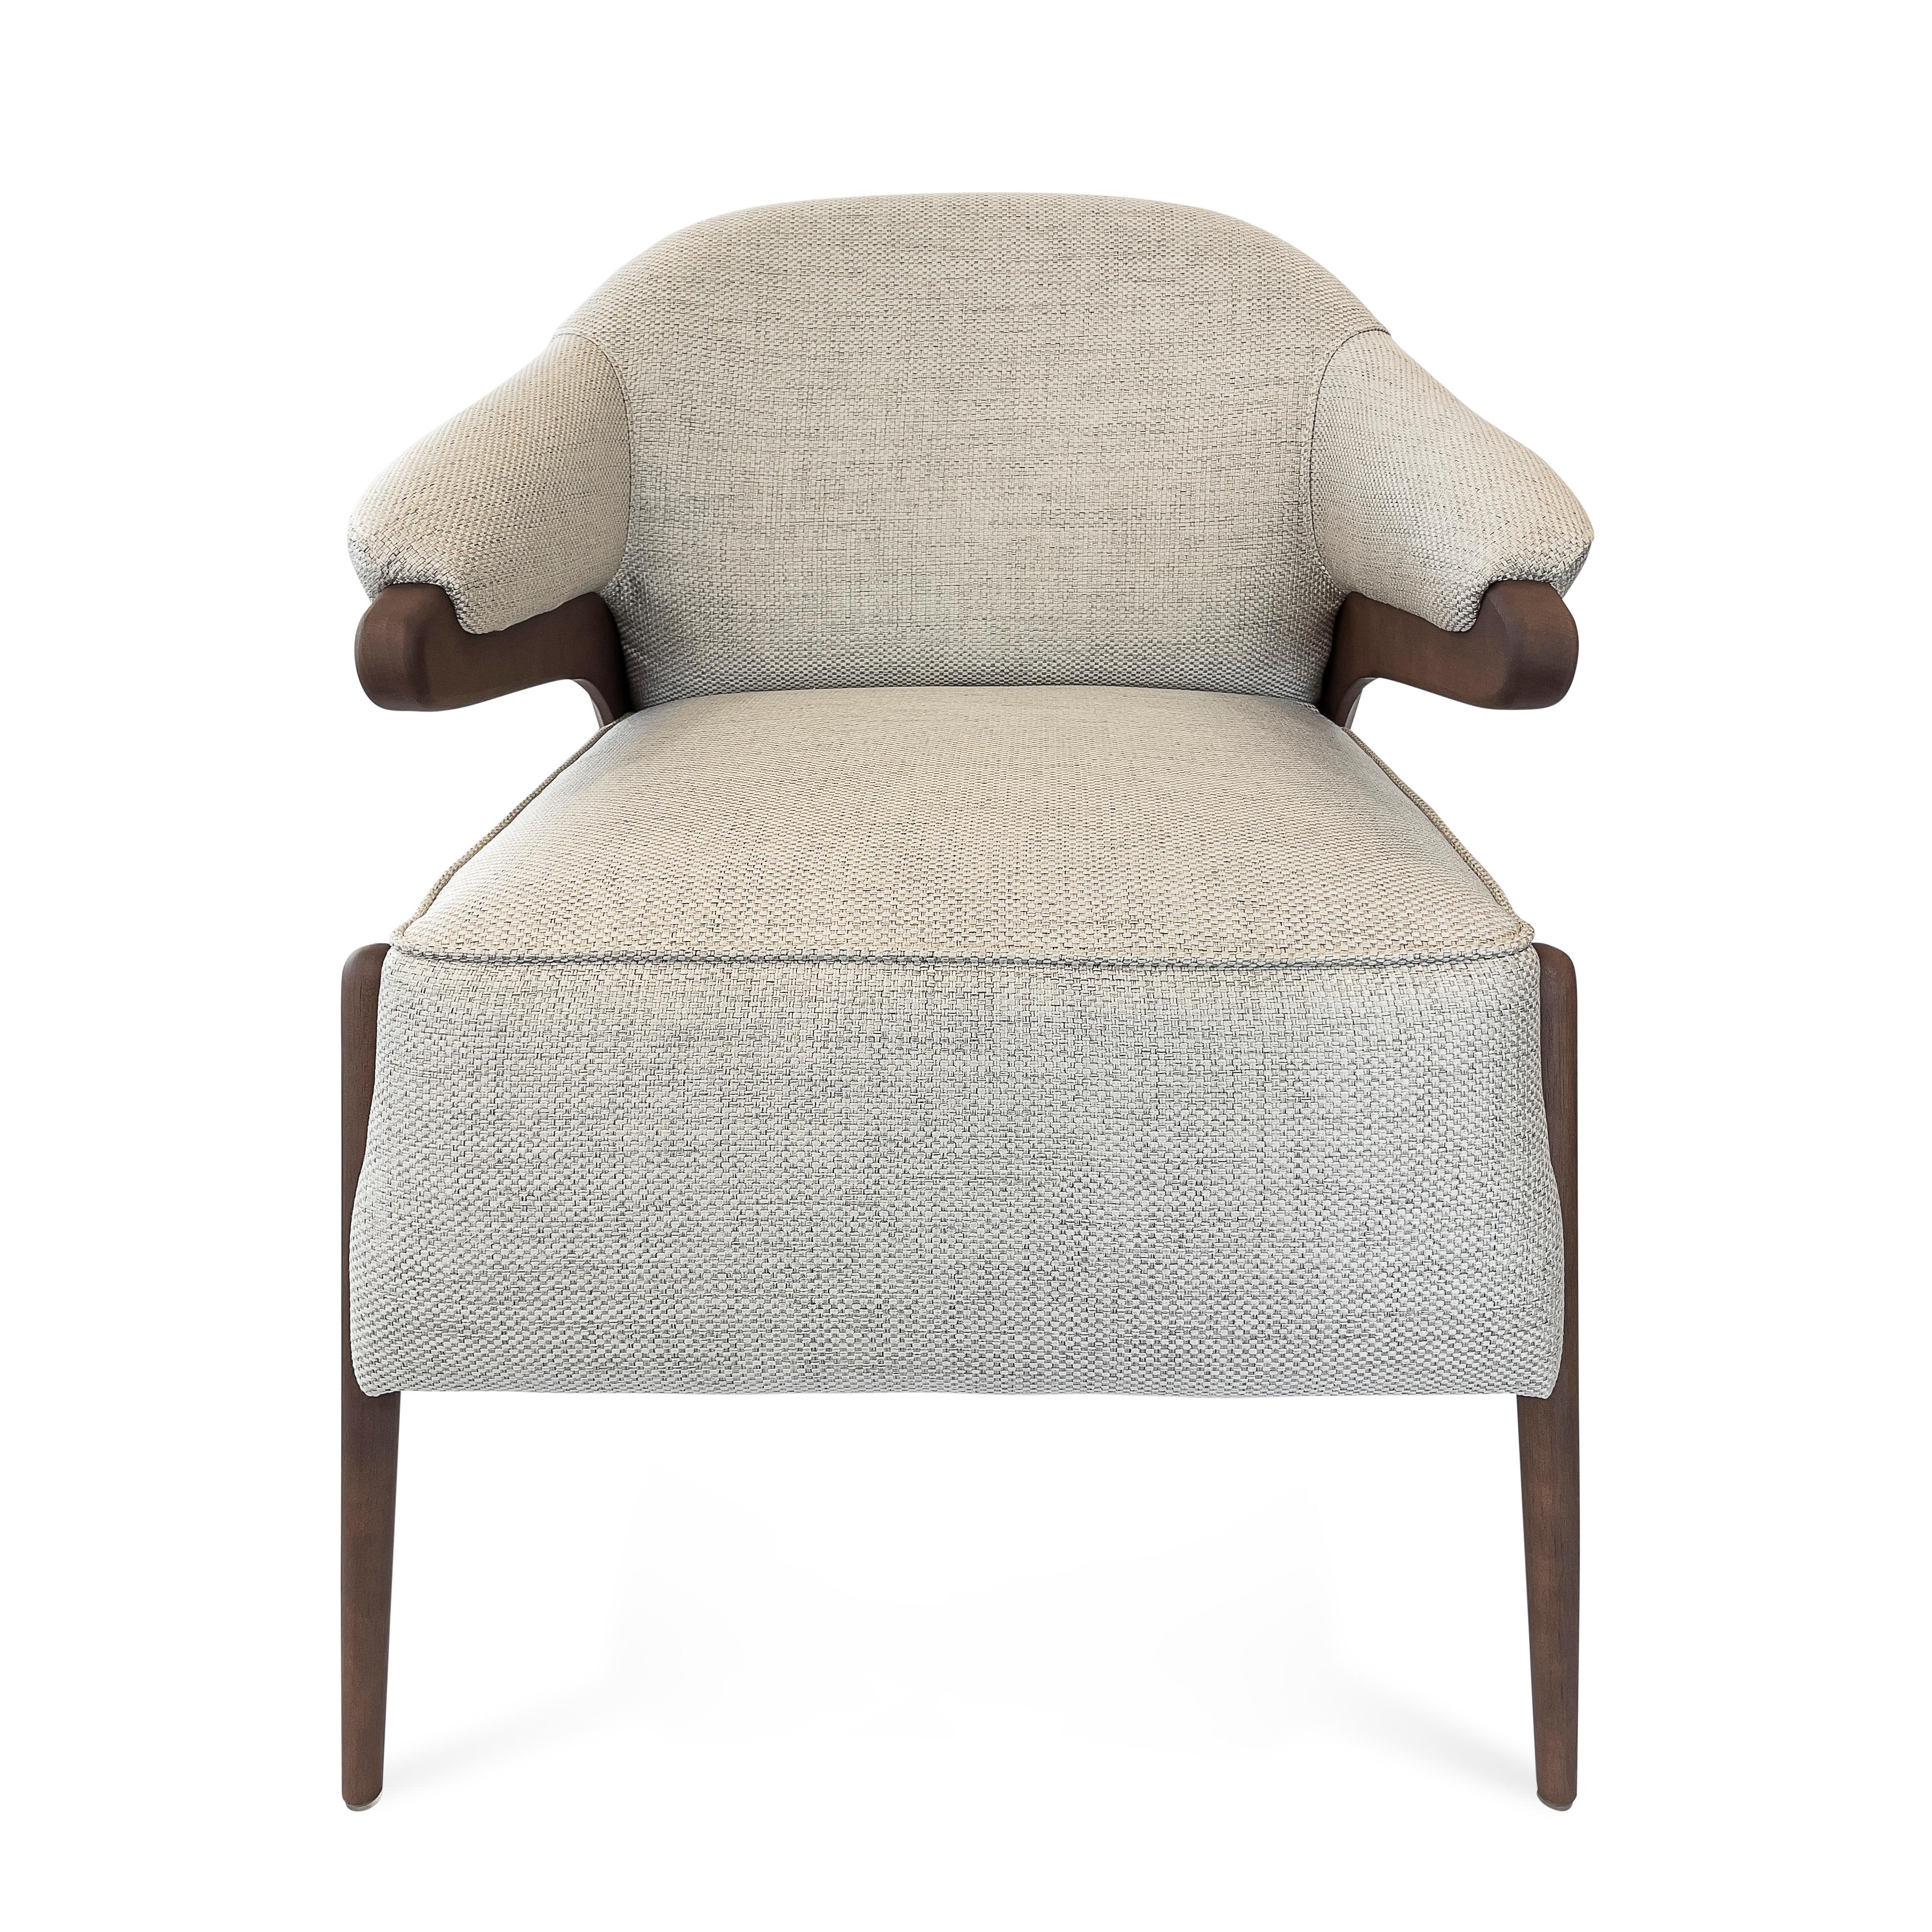 Our creative team from Uultis has created this amazing upholstered armchair is the ideal furniture providing you the comfort and the perfect fit in a variety of settings including living rooms, dining rooms, offices, and bedrooms to add that extra